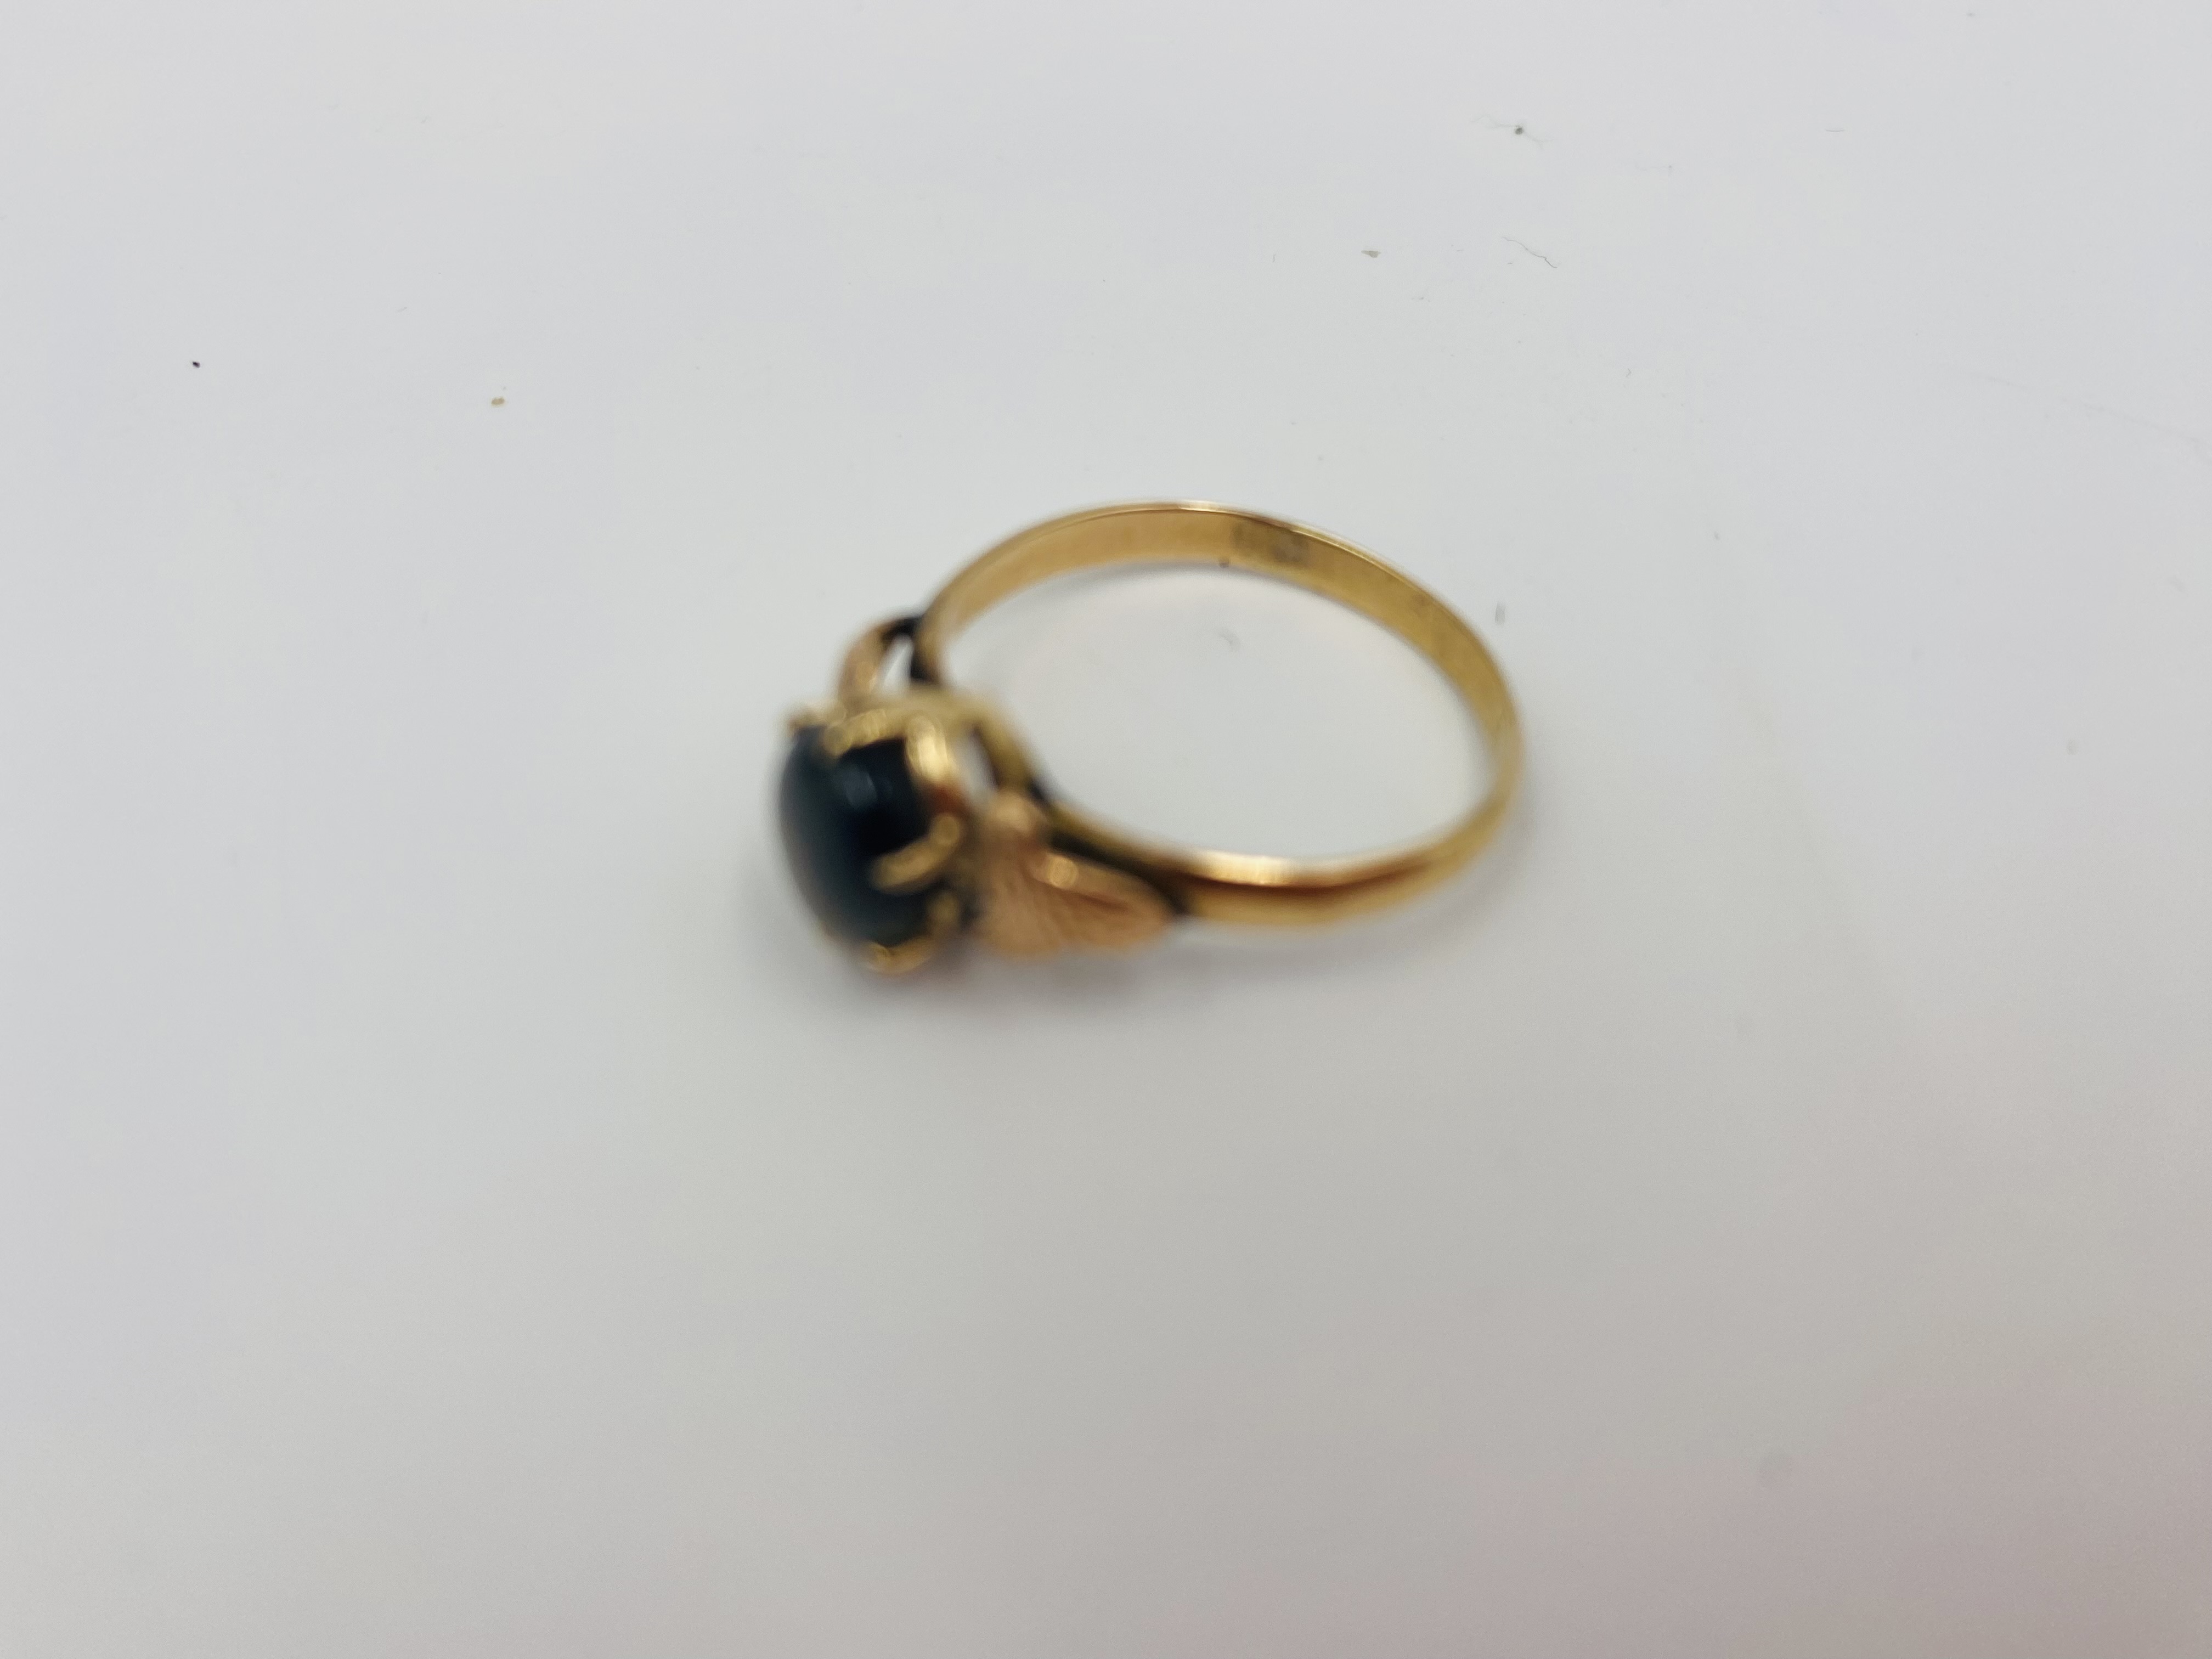 9ct gold ring set with a sapphire cabochon - Image 6 of 9